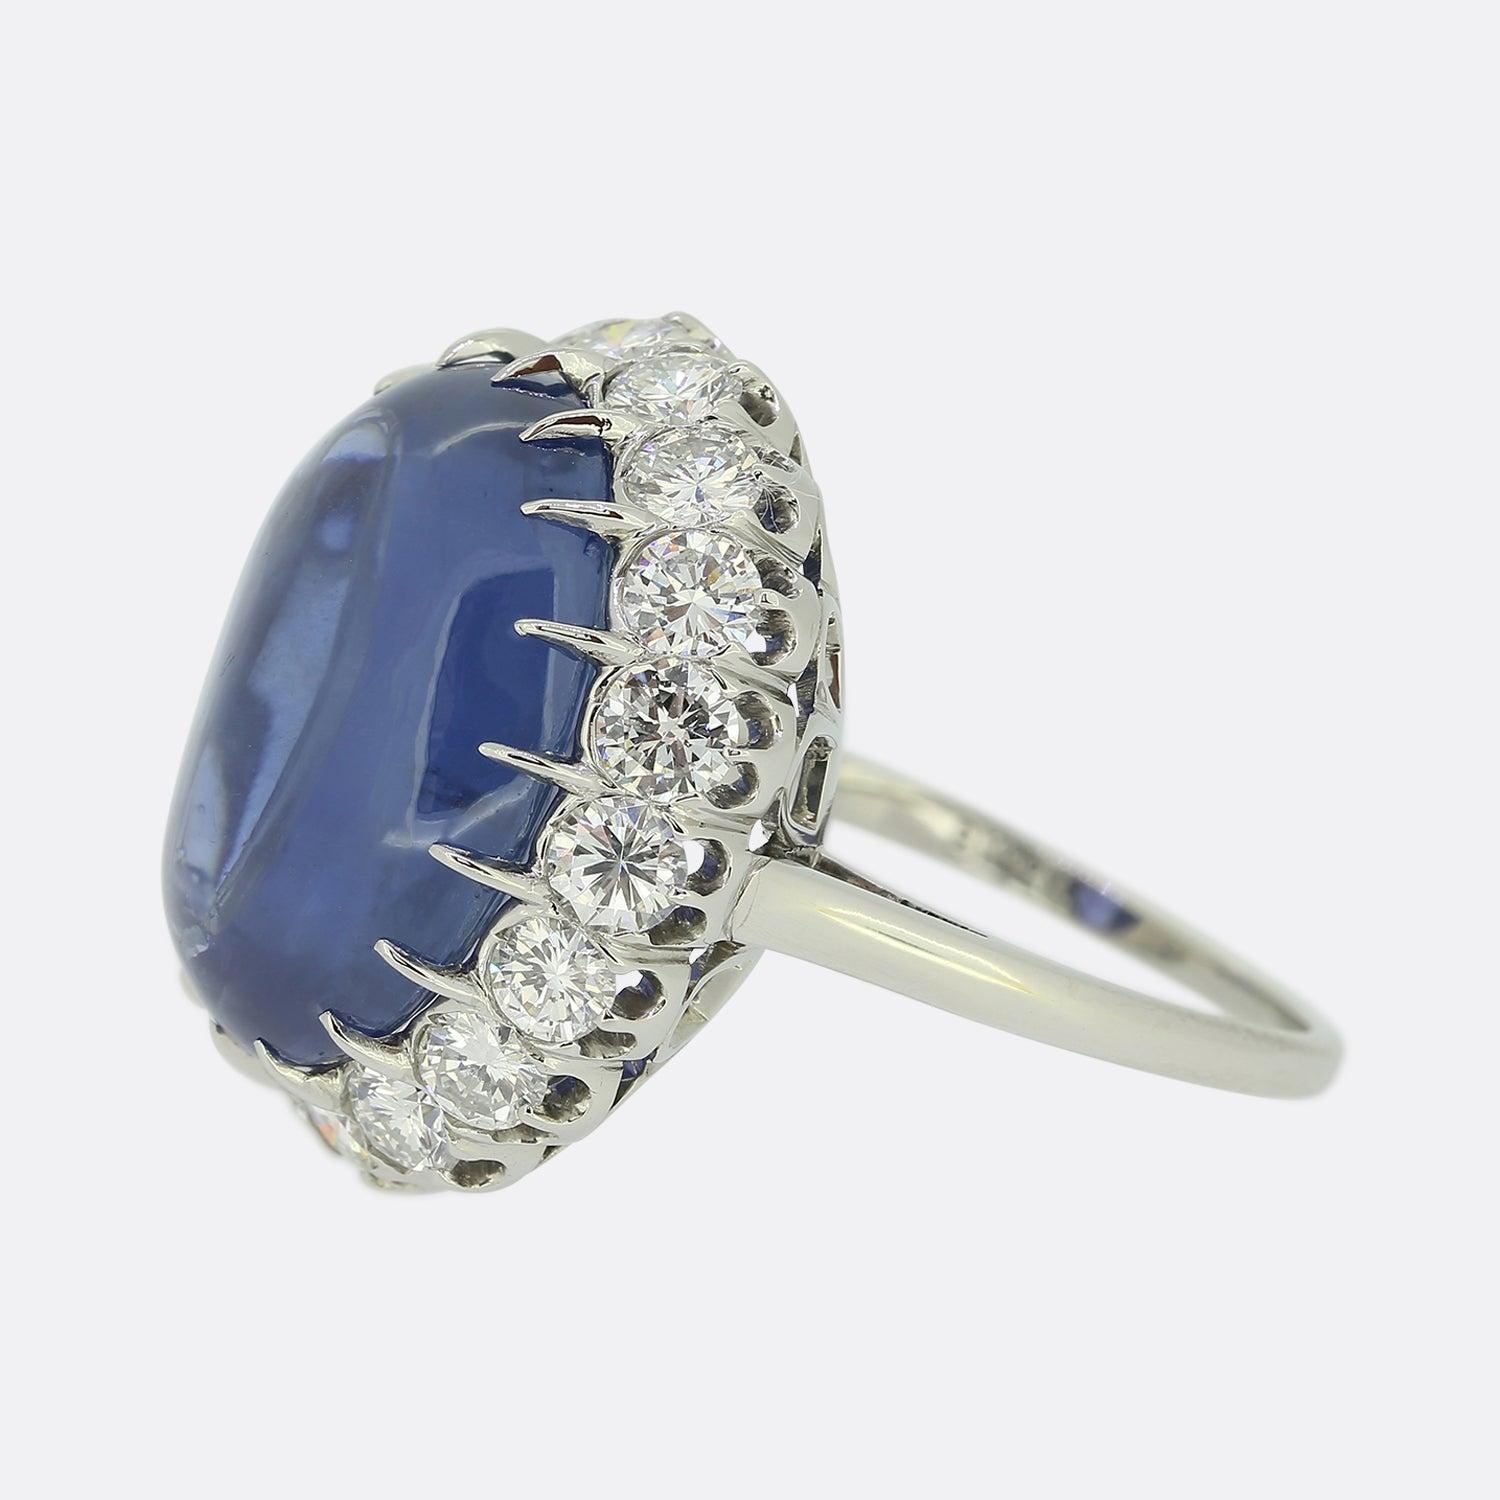 Here we have an outstanding sapphire and diamond cocktail ring. A large 19.30ct natural cabochon sapphire of Ceylon origin sits at the centre of the face and showcases a stunning violet blue colour tone. This principle stone is then framed by a